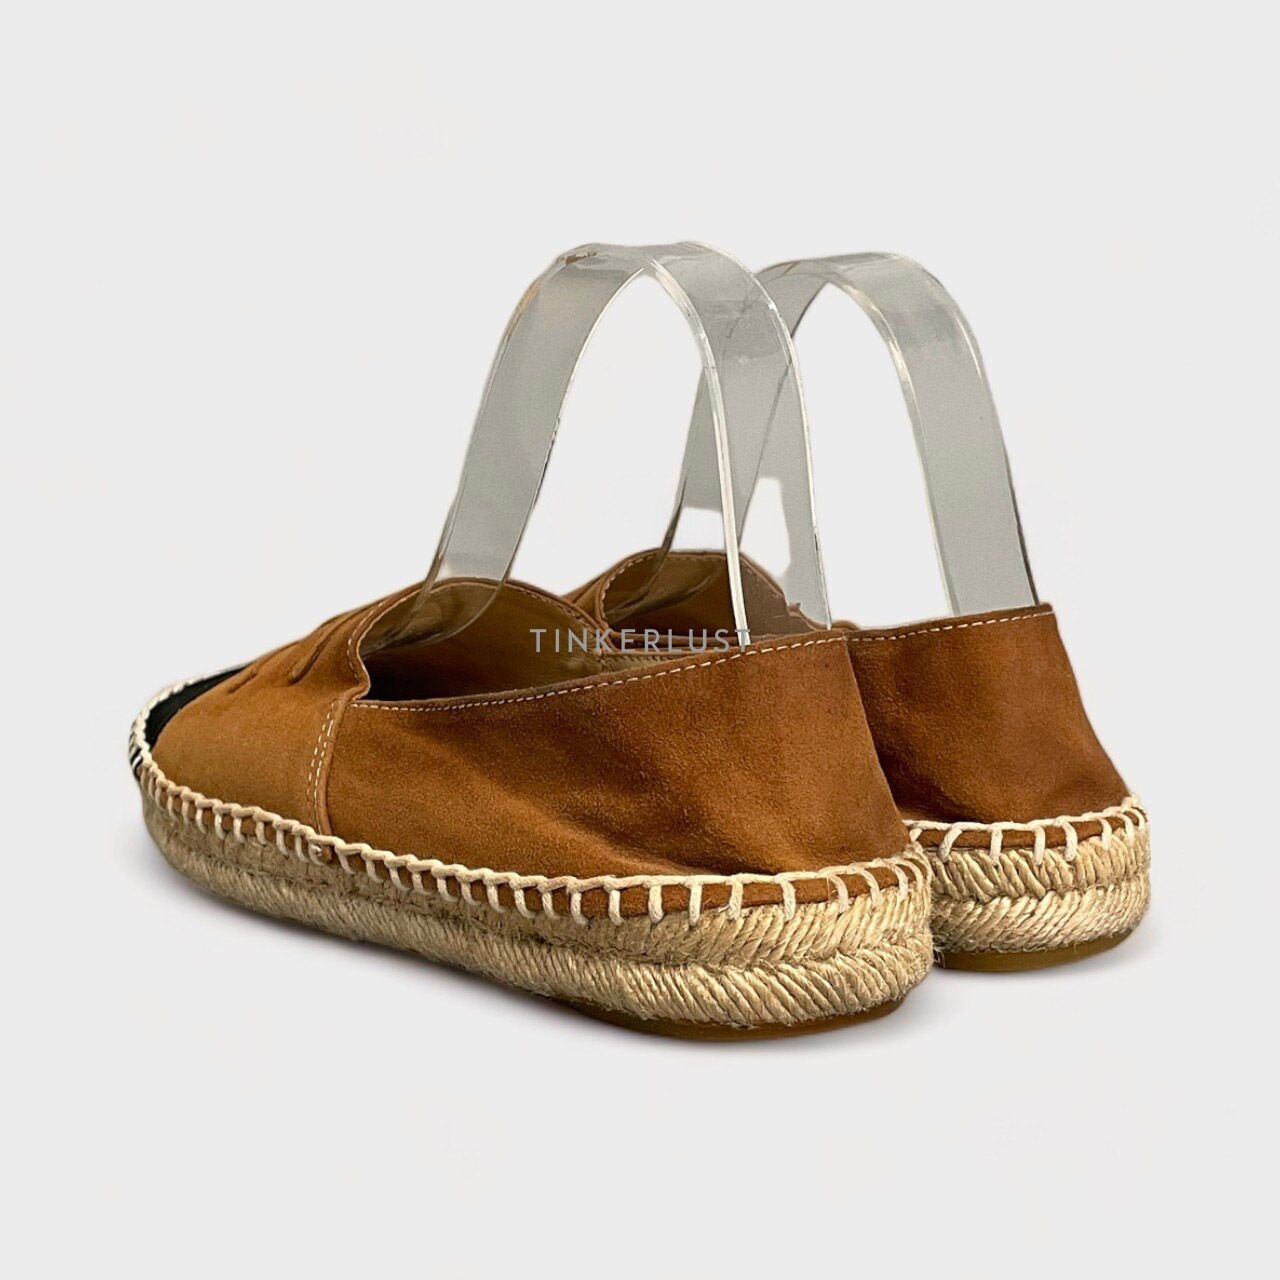 Chanel Espadrilles Brown Suede Leather Flats